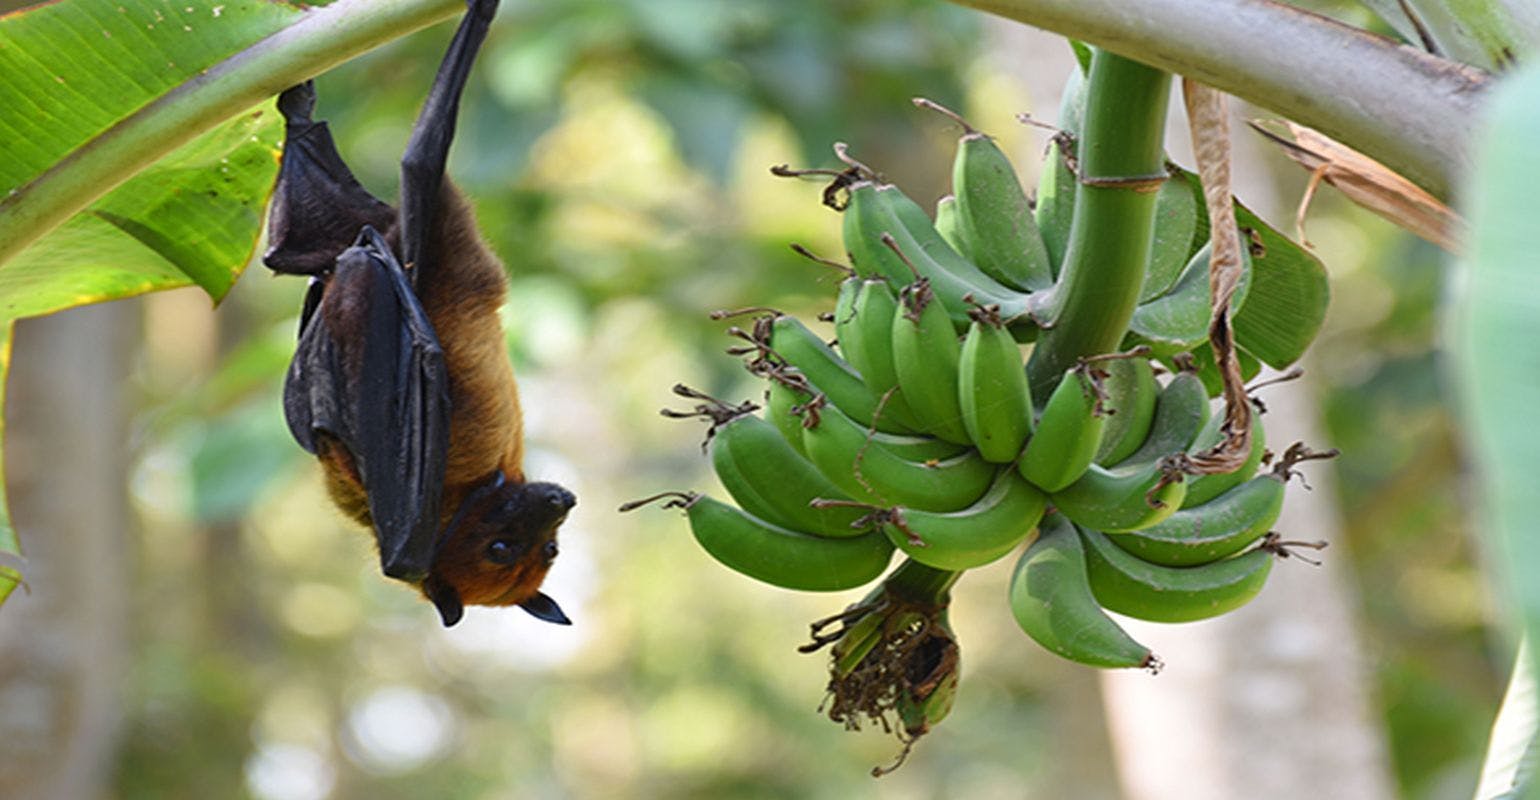 Model Predicts Bat Species With the Potential to Spread Nipah Virus in India